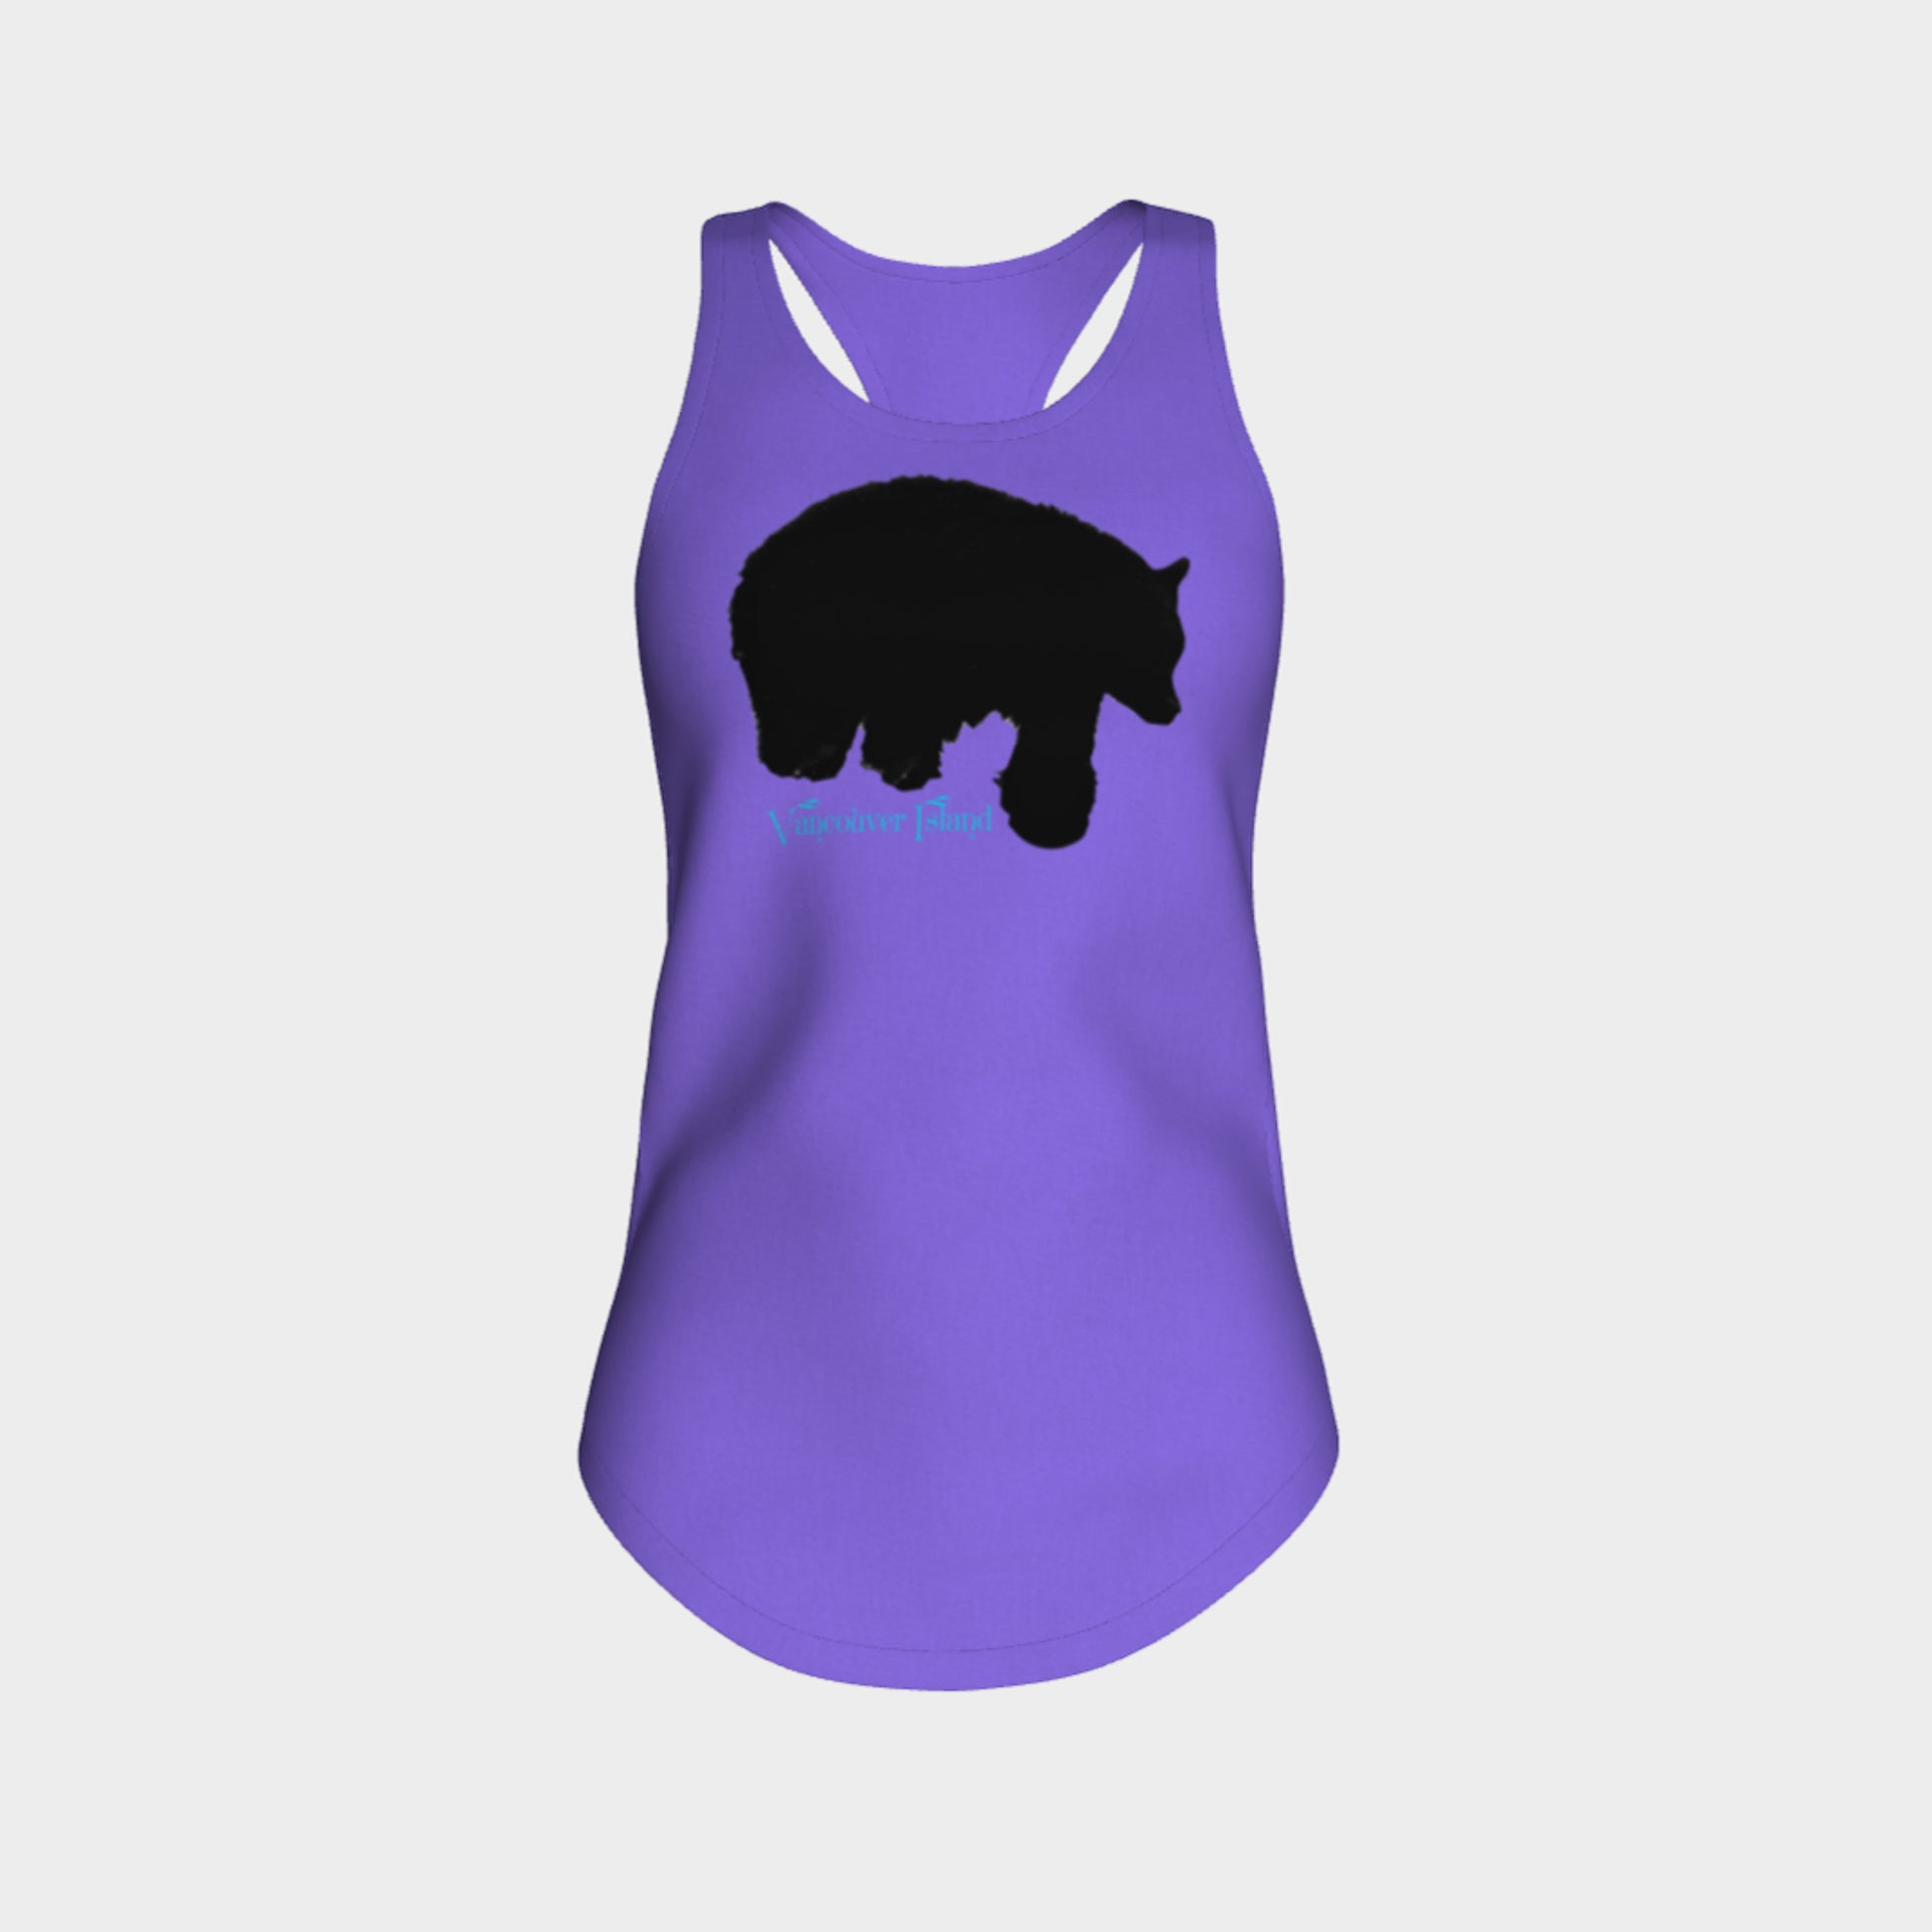 Bear Vancouver Island Racerback Tank Top by VanIsleGoddess.Com available in summer colours.